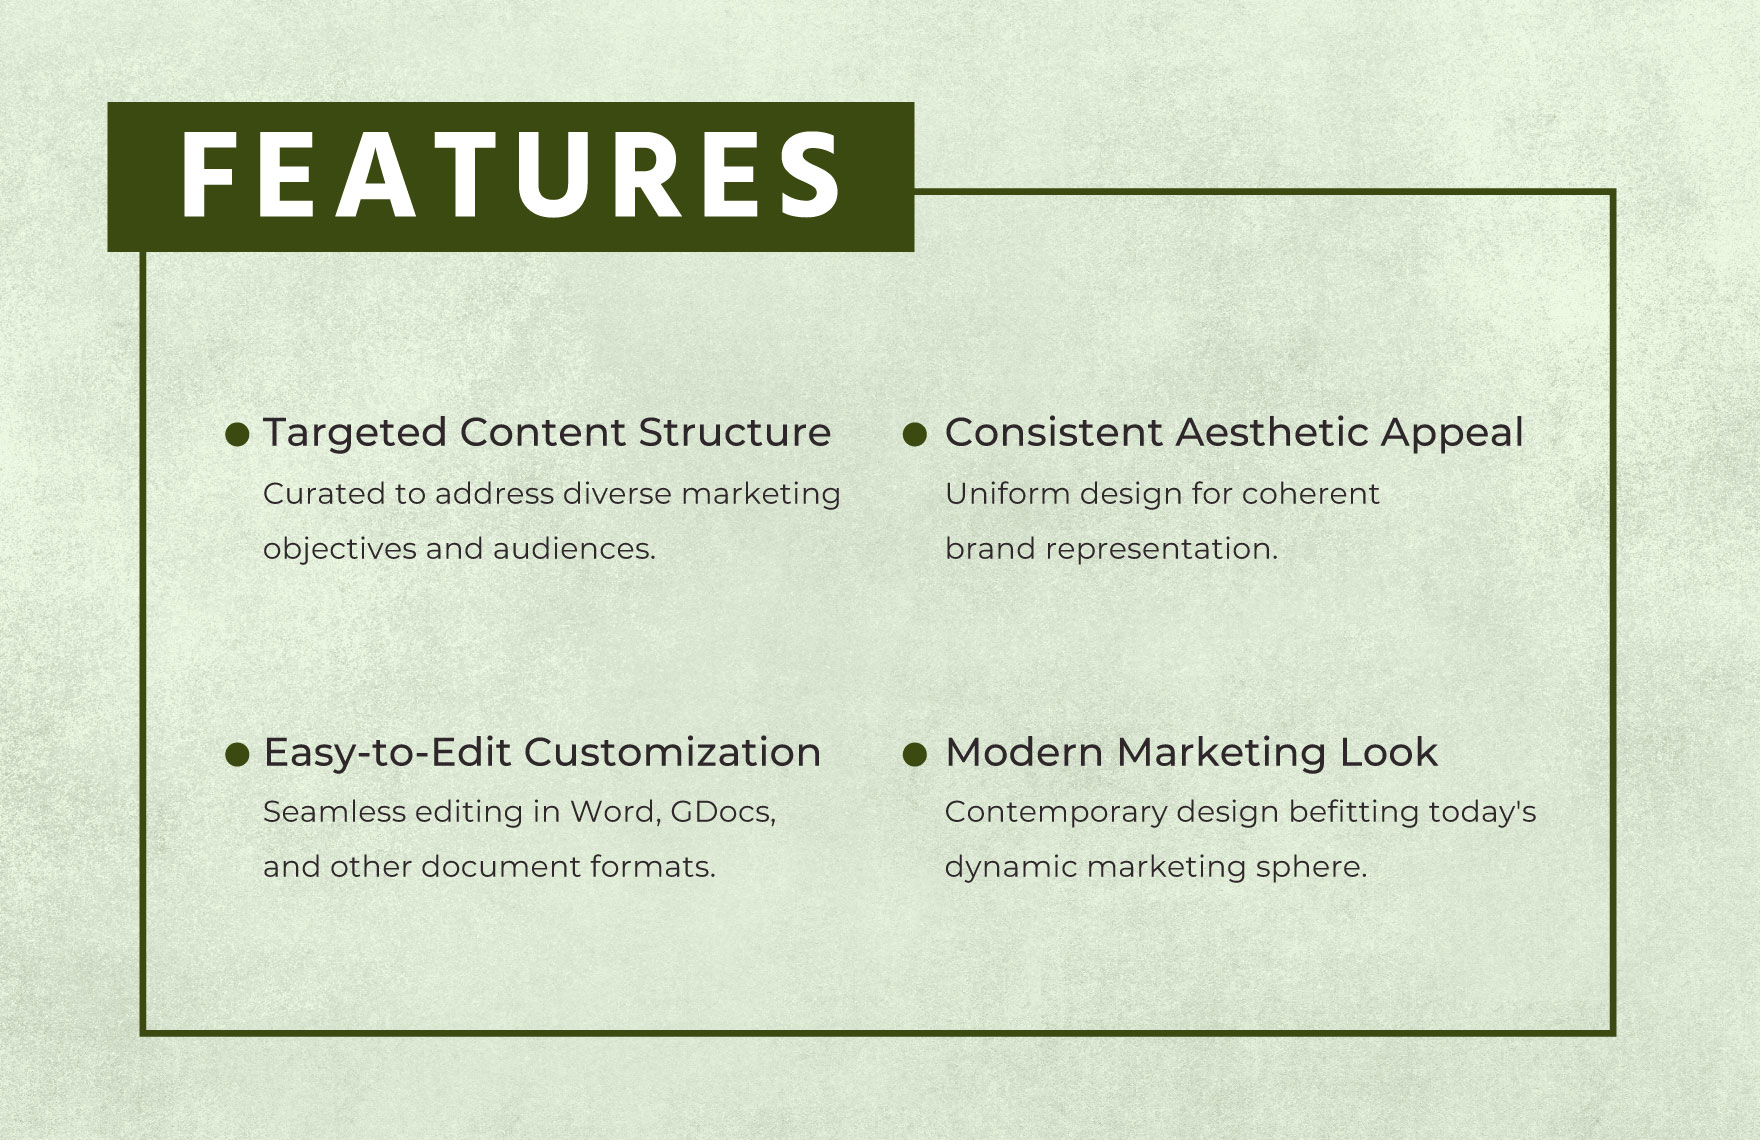 Marketing Content Sourcing Statement Template